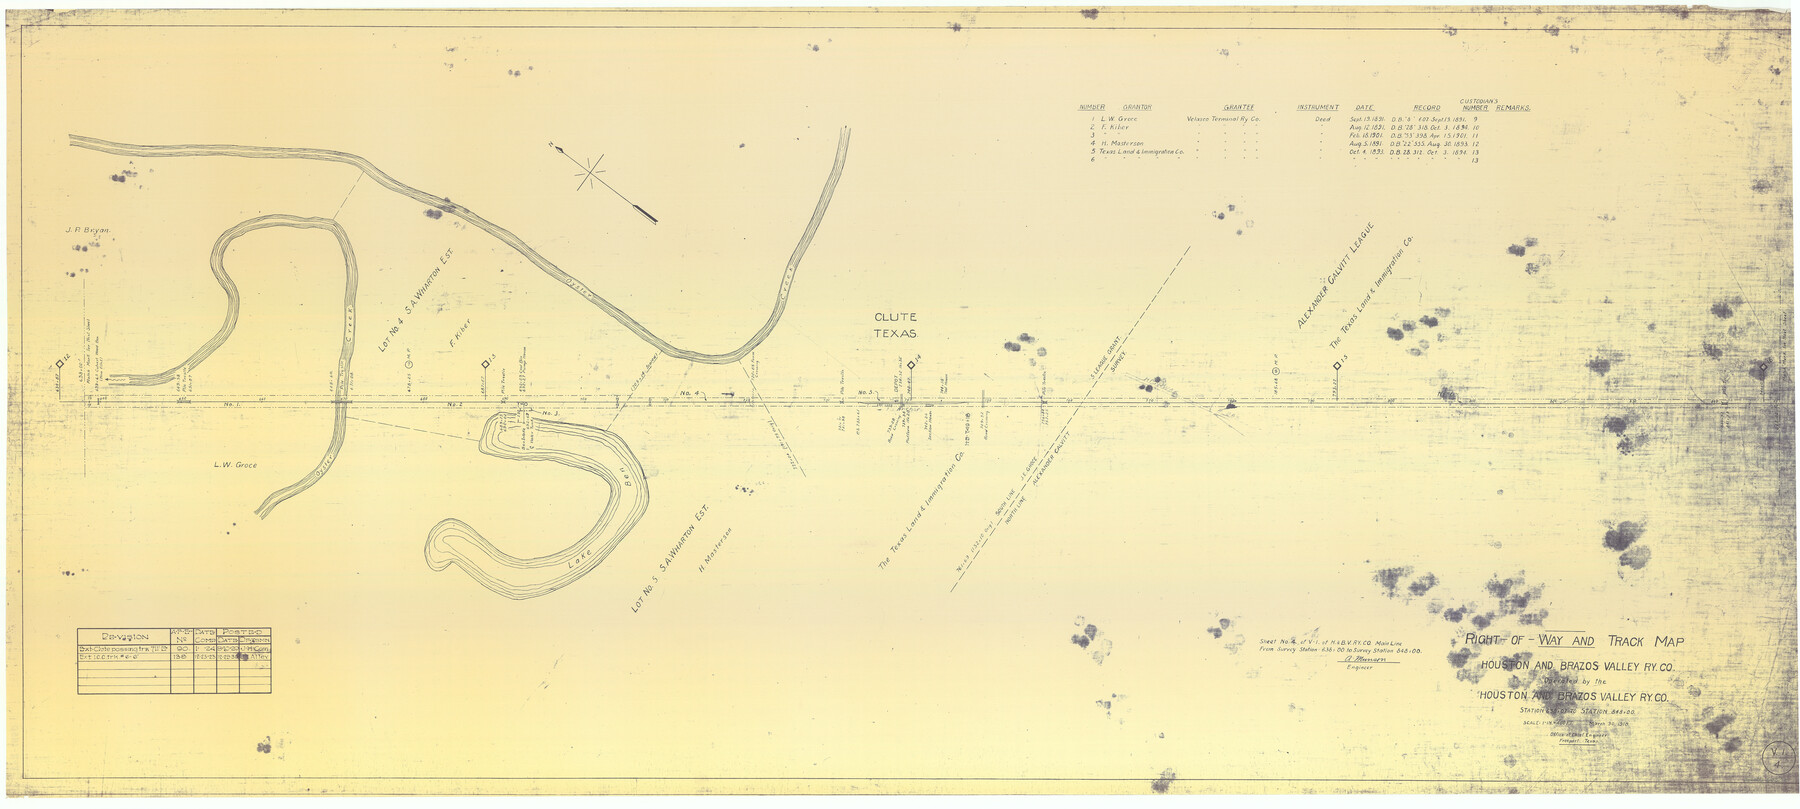 64605, Right-of-Way & Track Map, Houston and Brazos Valley Ry. Co. operated by the Houston and Brazos Valley Ry. Co., General Map Collection